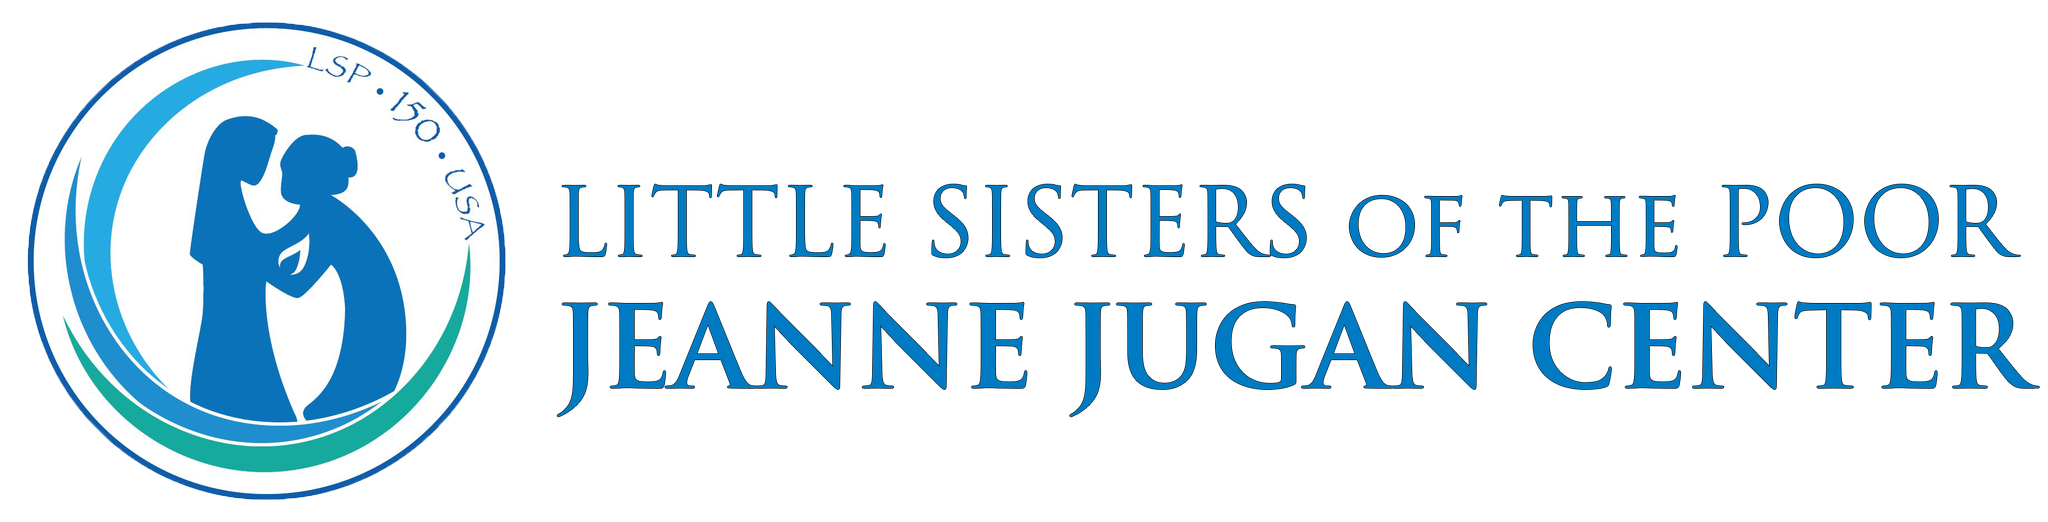 Little Sisters of the Poor Kansas City